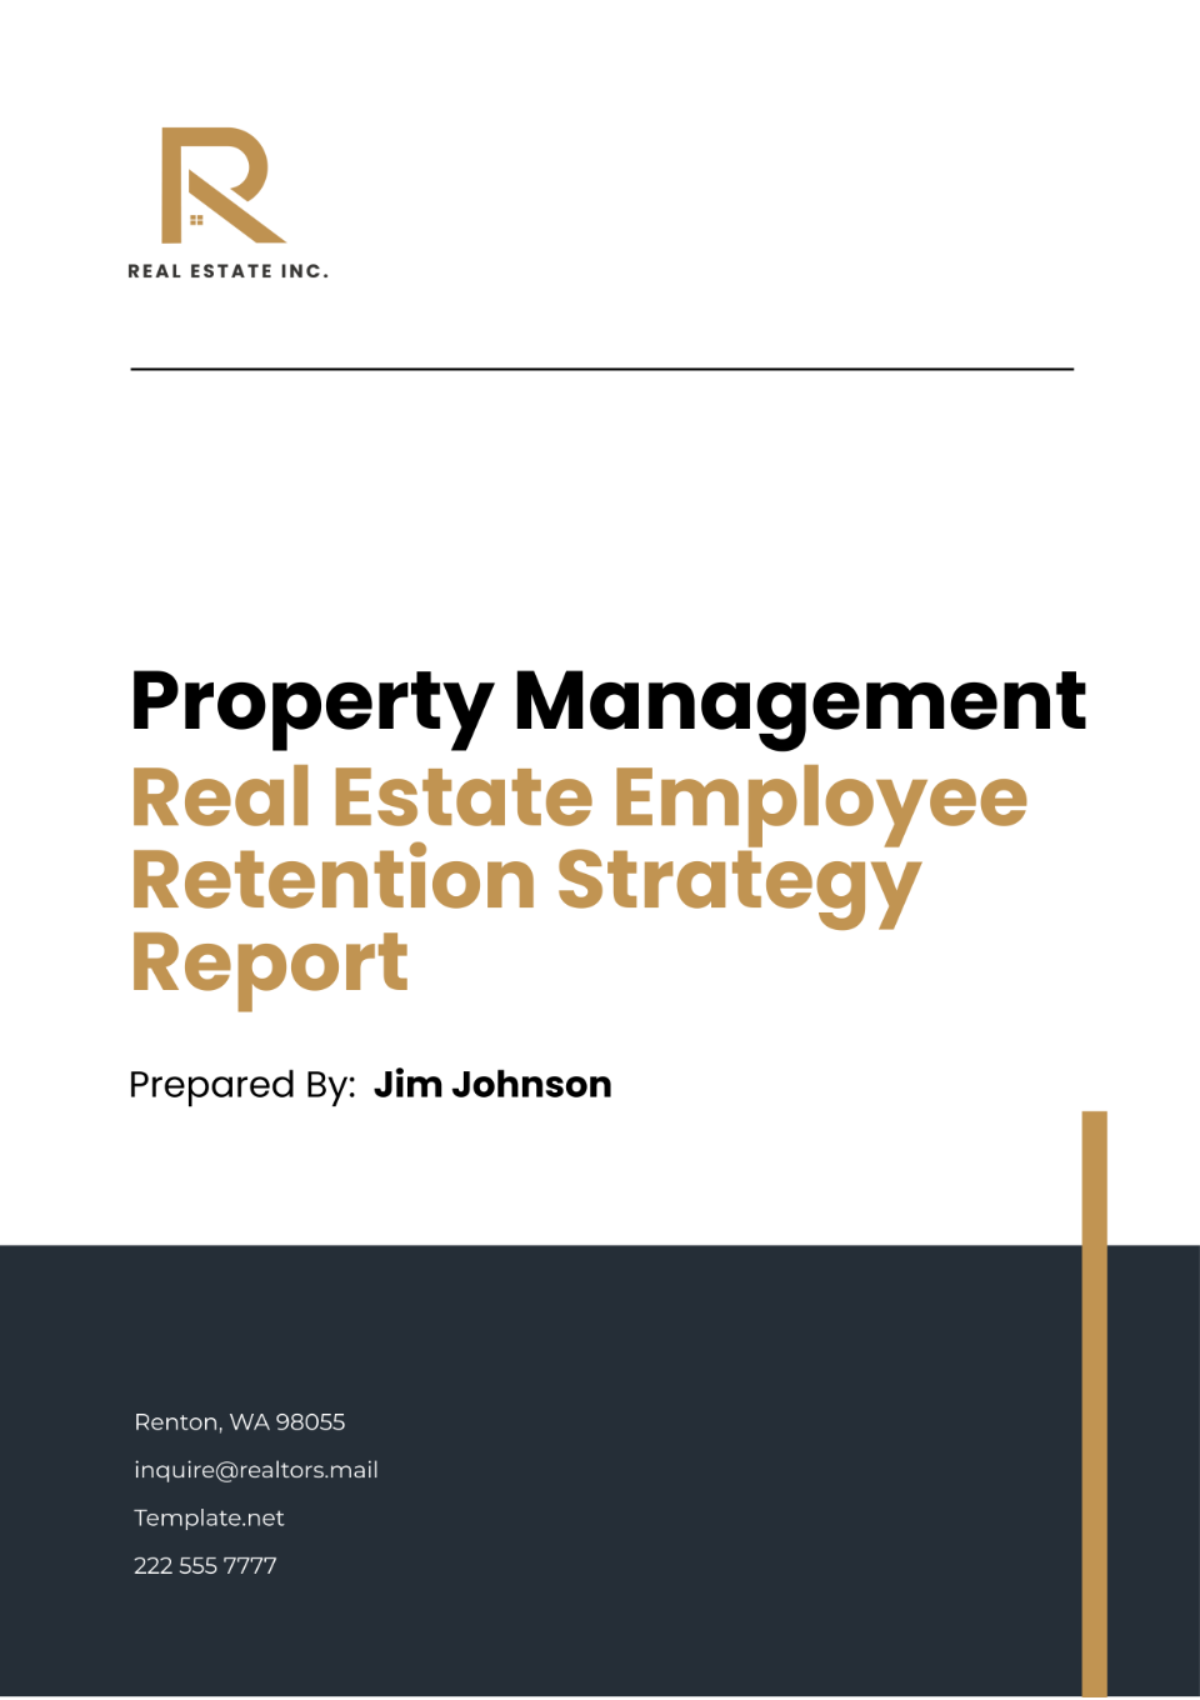 Free Real Estate Employee Retention Strategy Report Template